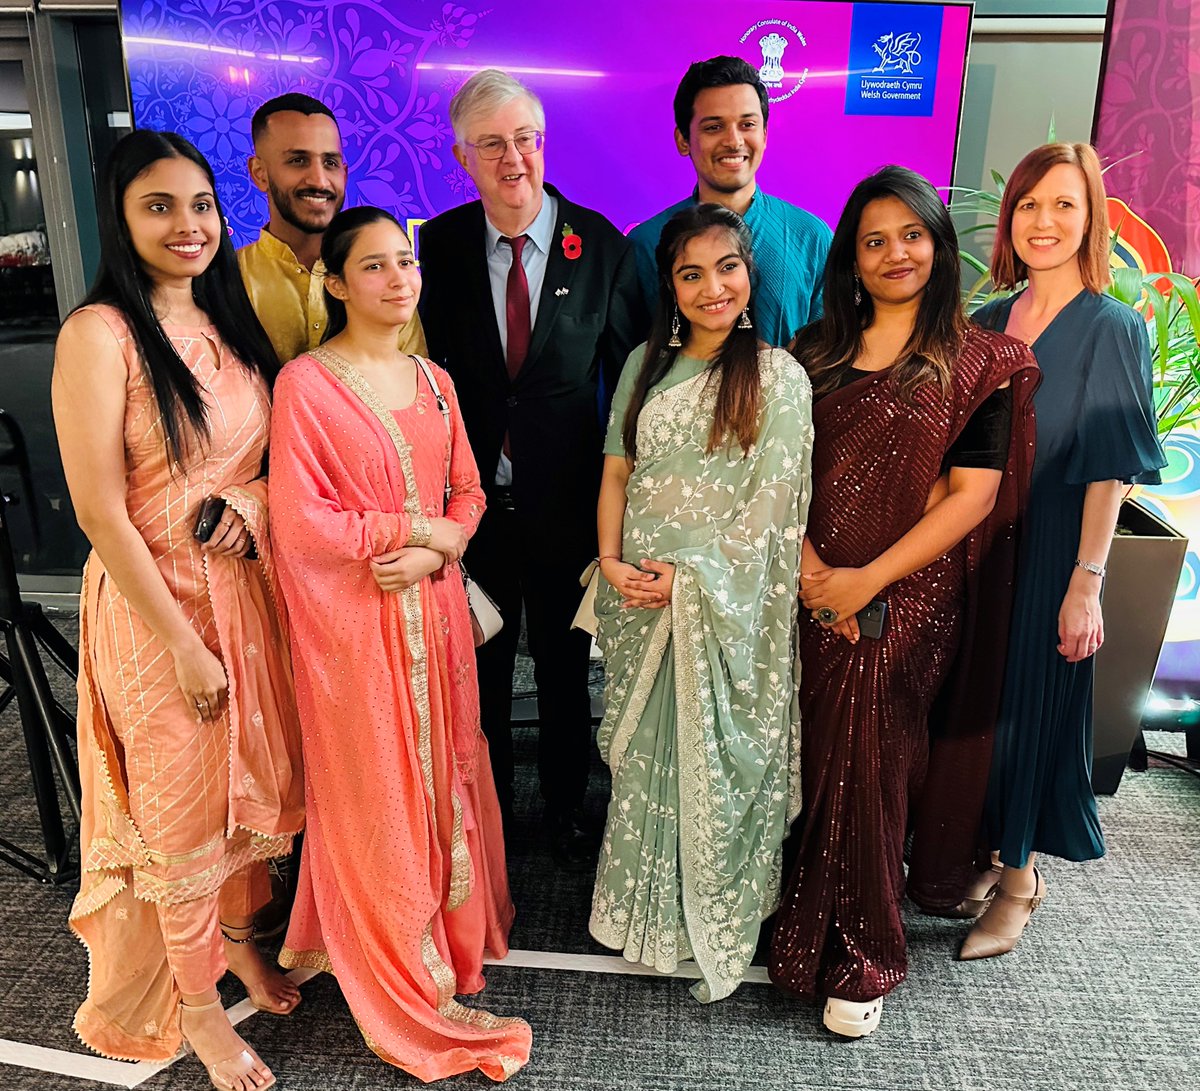 Six of our students attended a Diwali celebration hosted by @PrifWeinidog and Raj Aggarwal OBE @hciwales. The First Minister spoke about how important international students are to Wales and our long-standing history of welcoming Indian students to our universities.